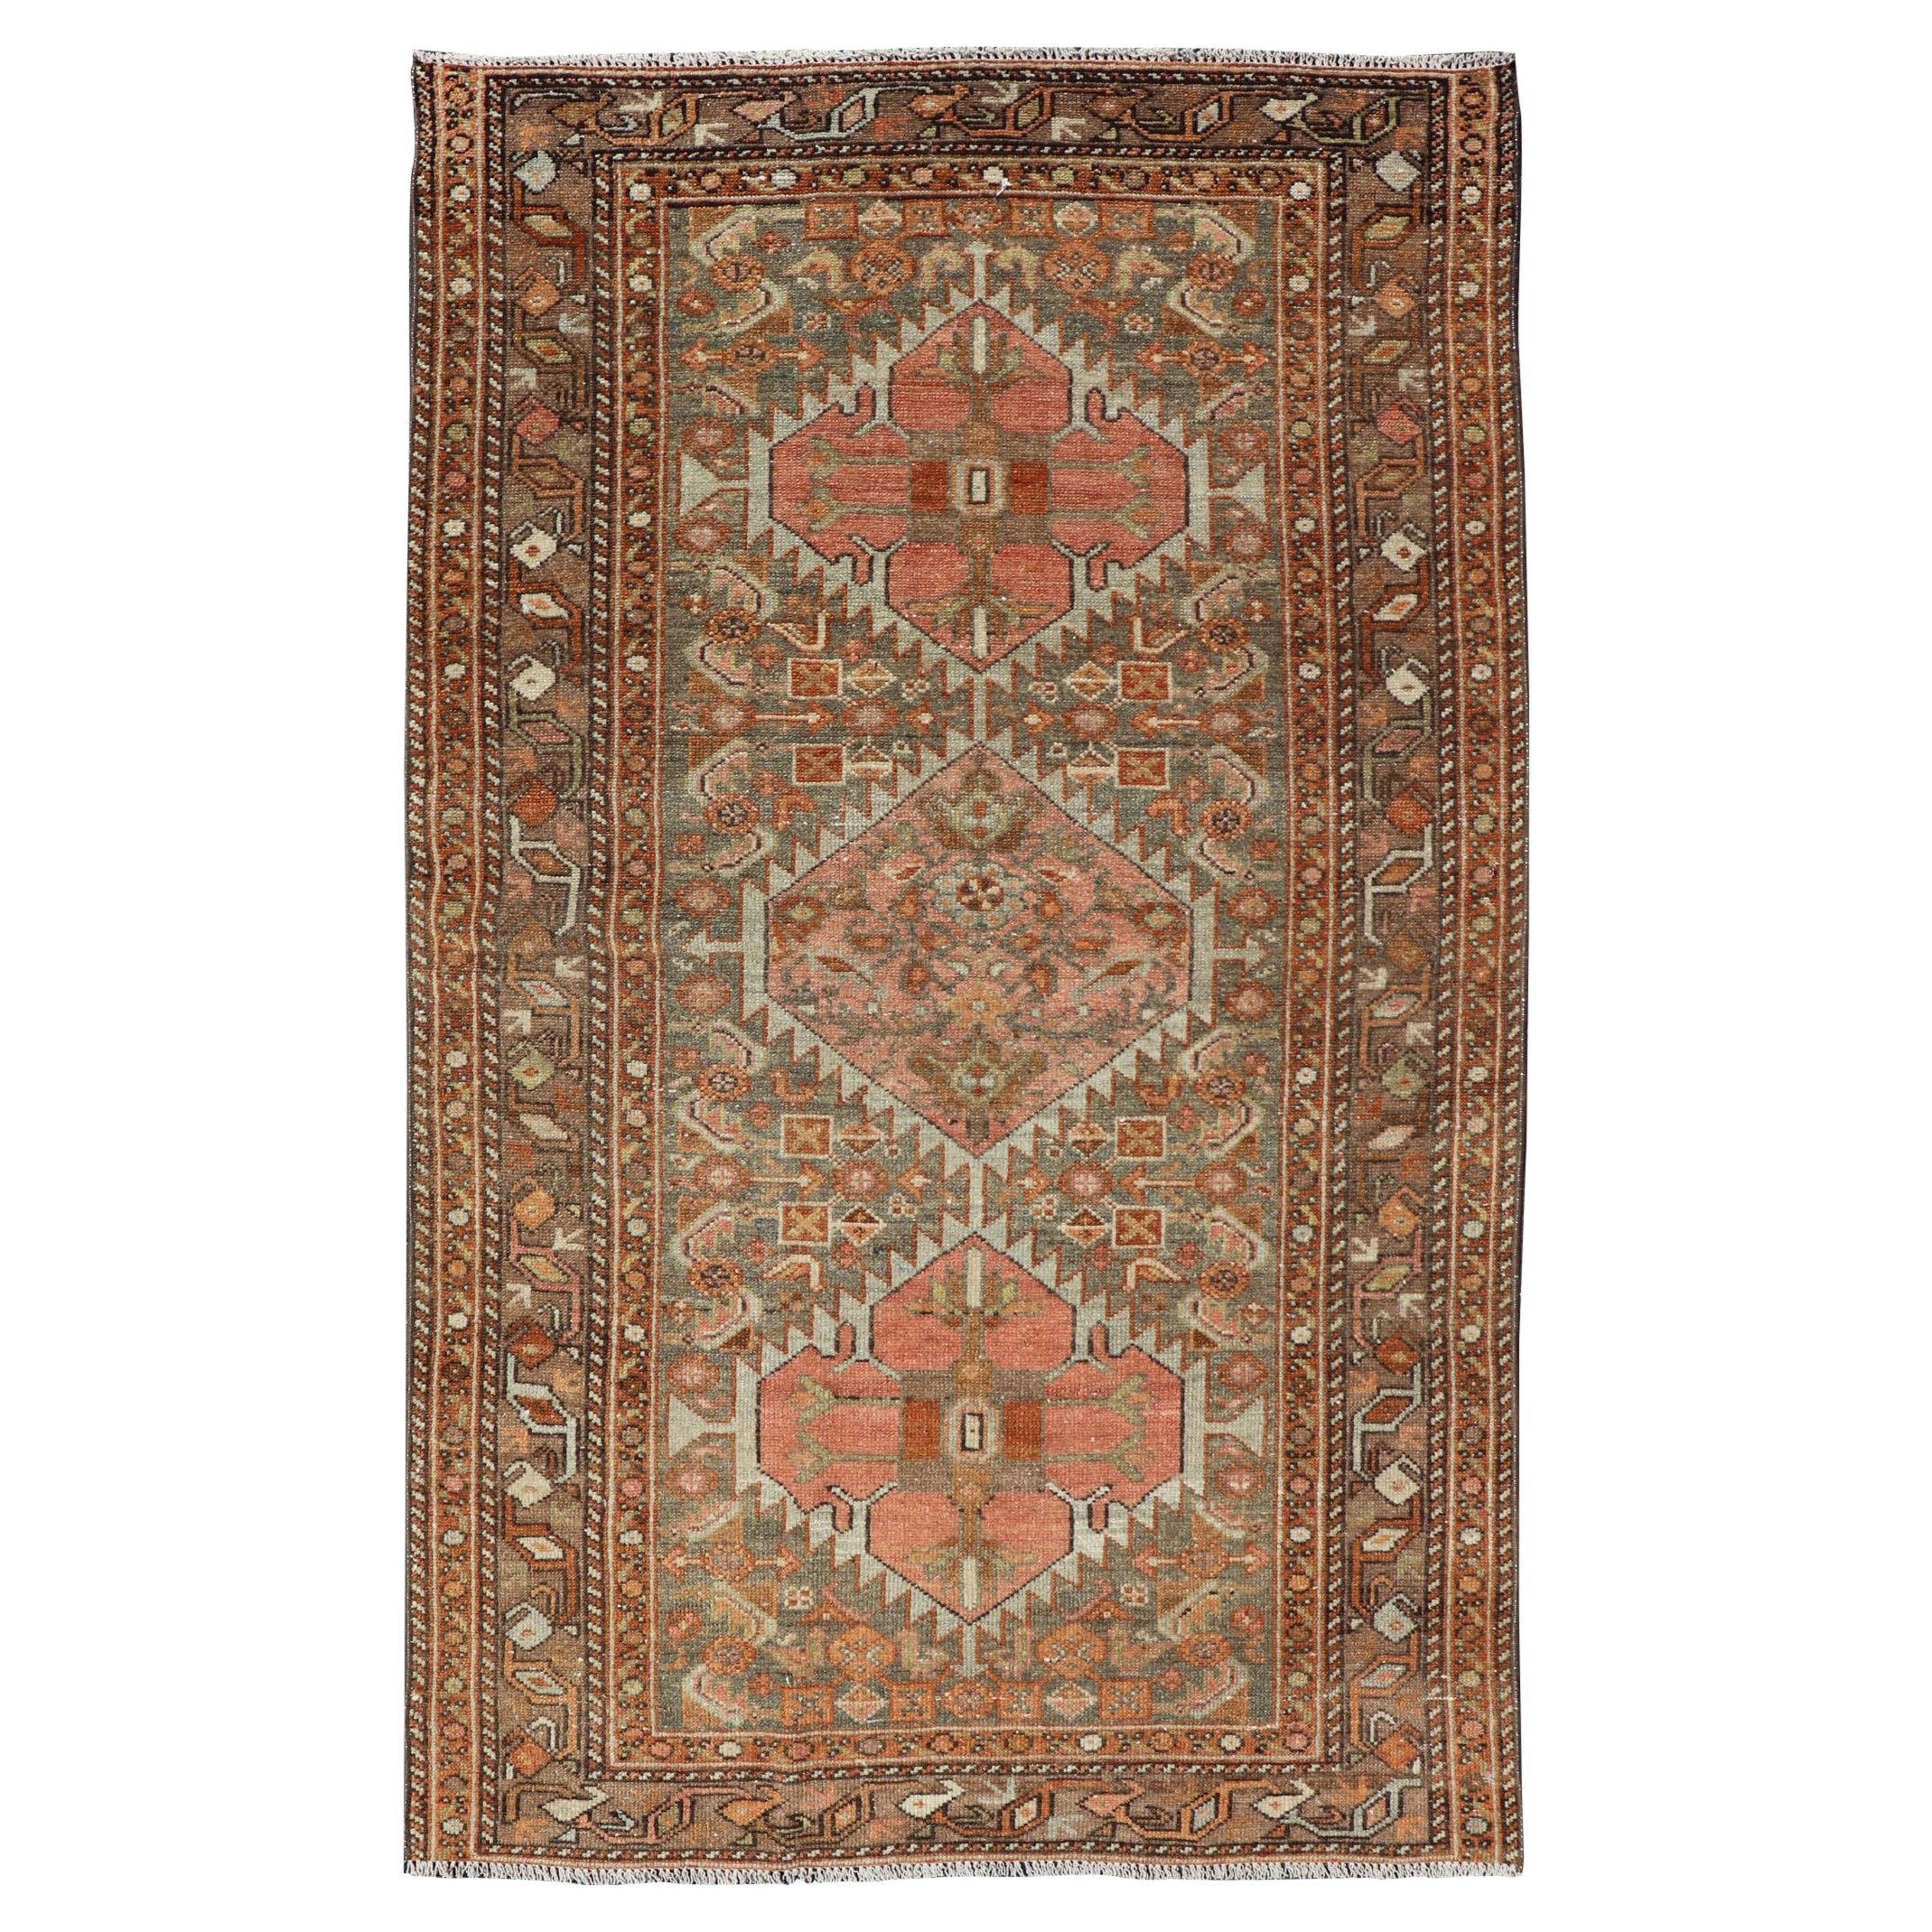 Antique Persian Hamedan in Rustic Earthy Tones With Tribal Medallions For Sale